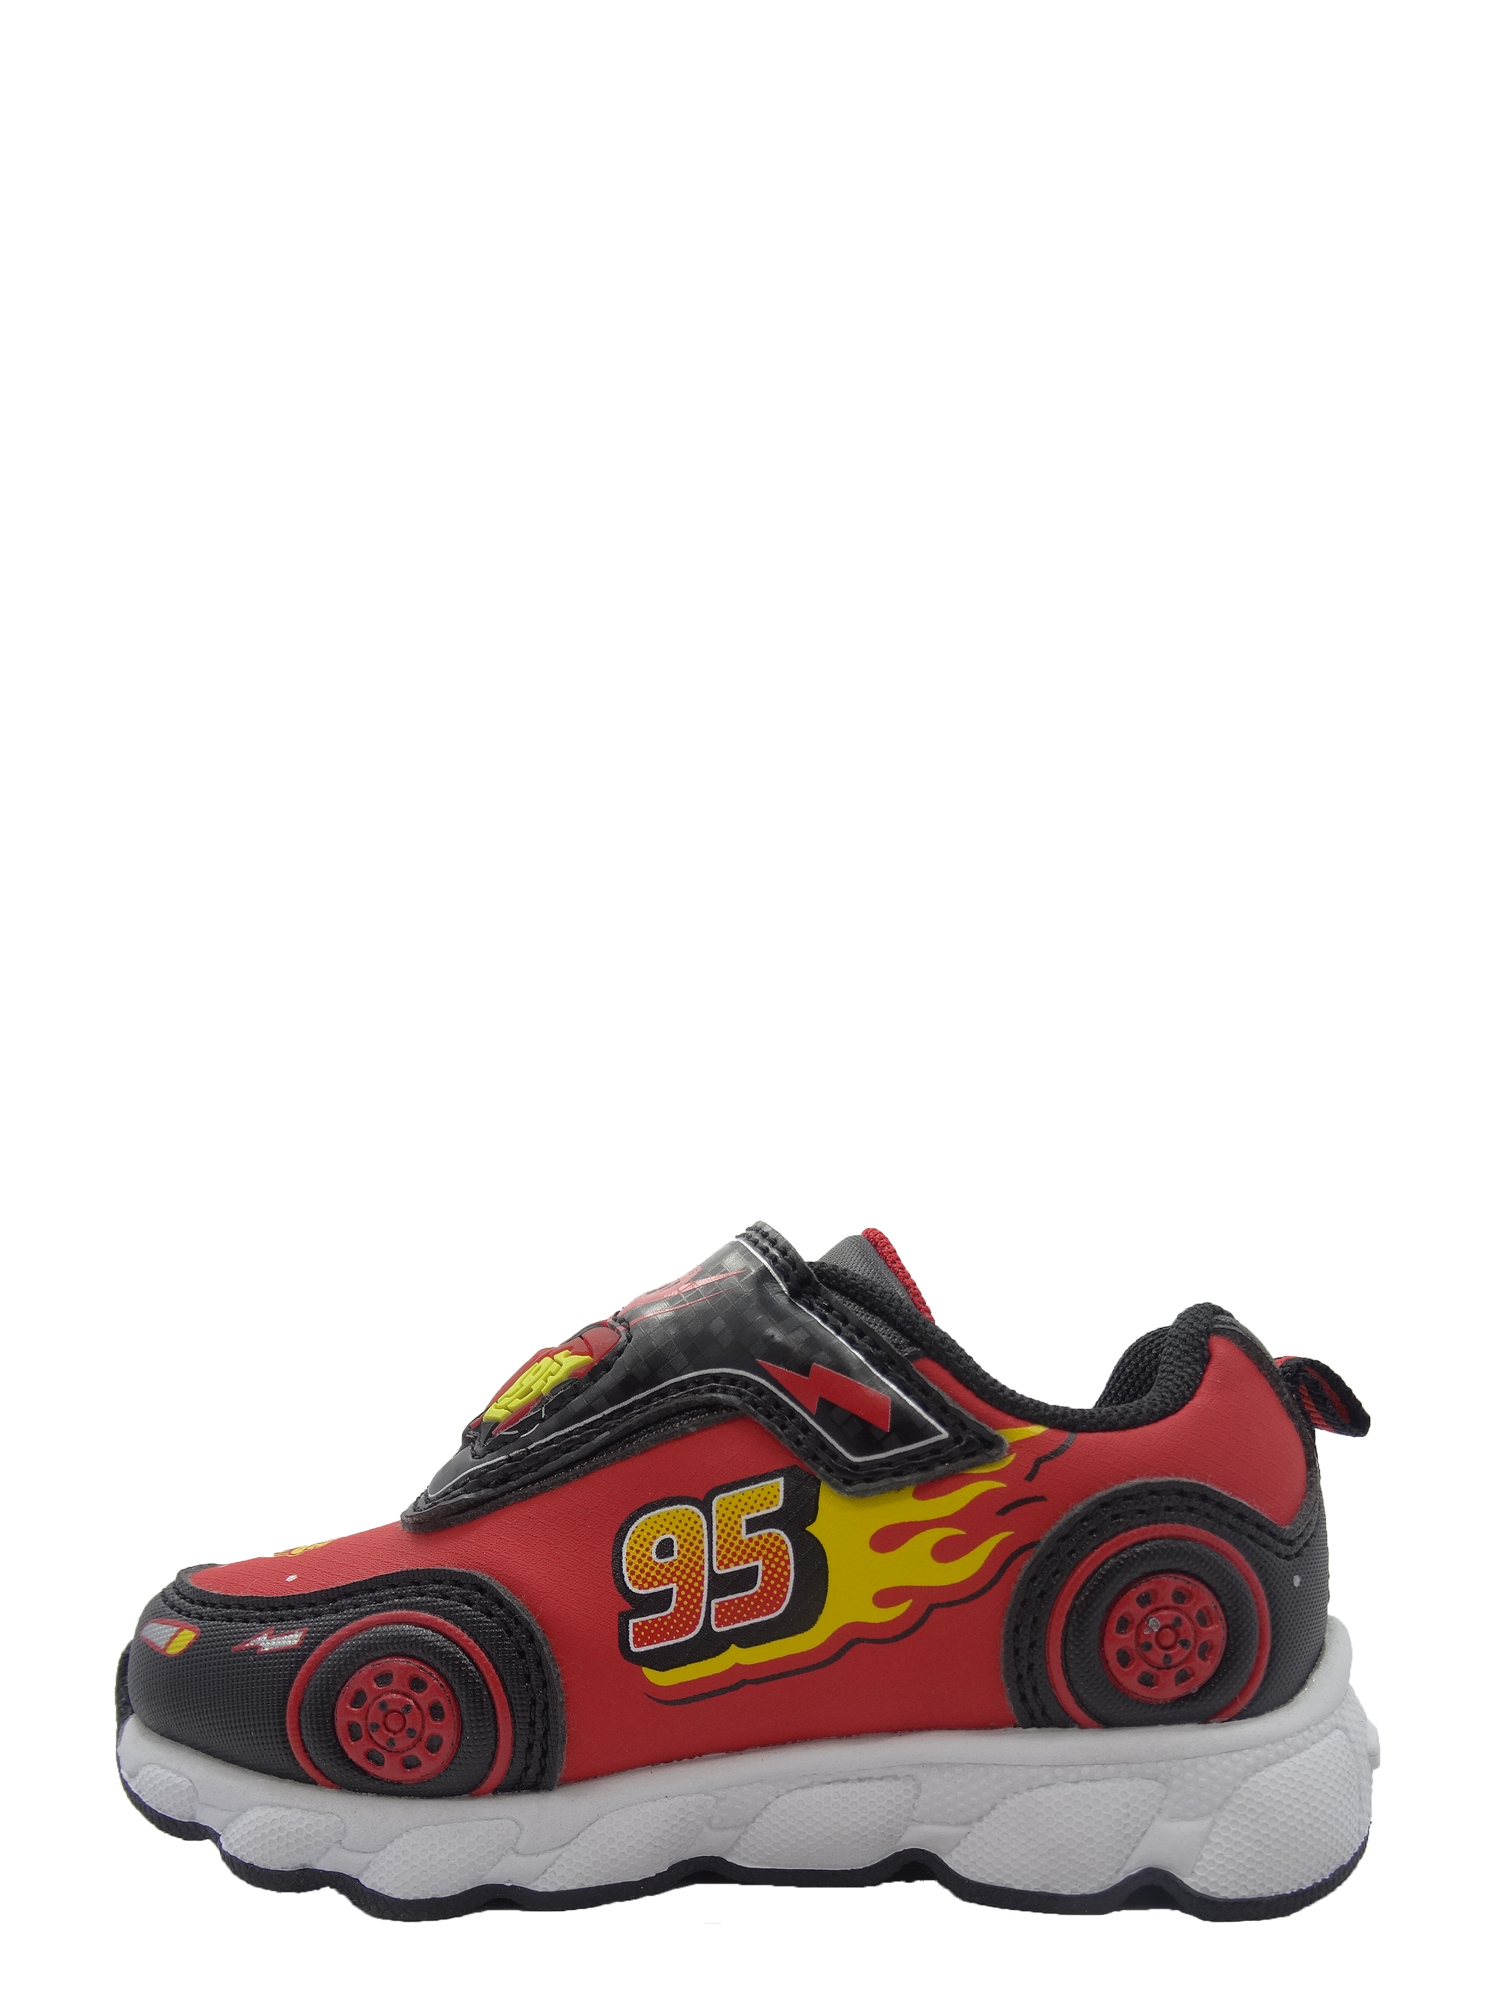 Cars Licensed Boys' Athletic Shoe - image 3 of 5